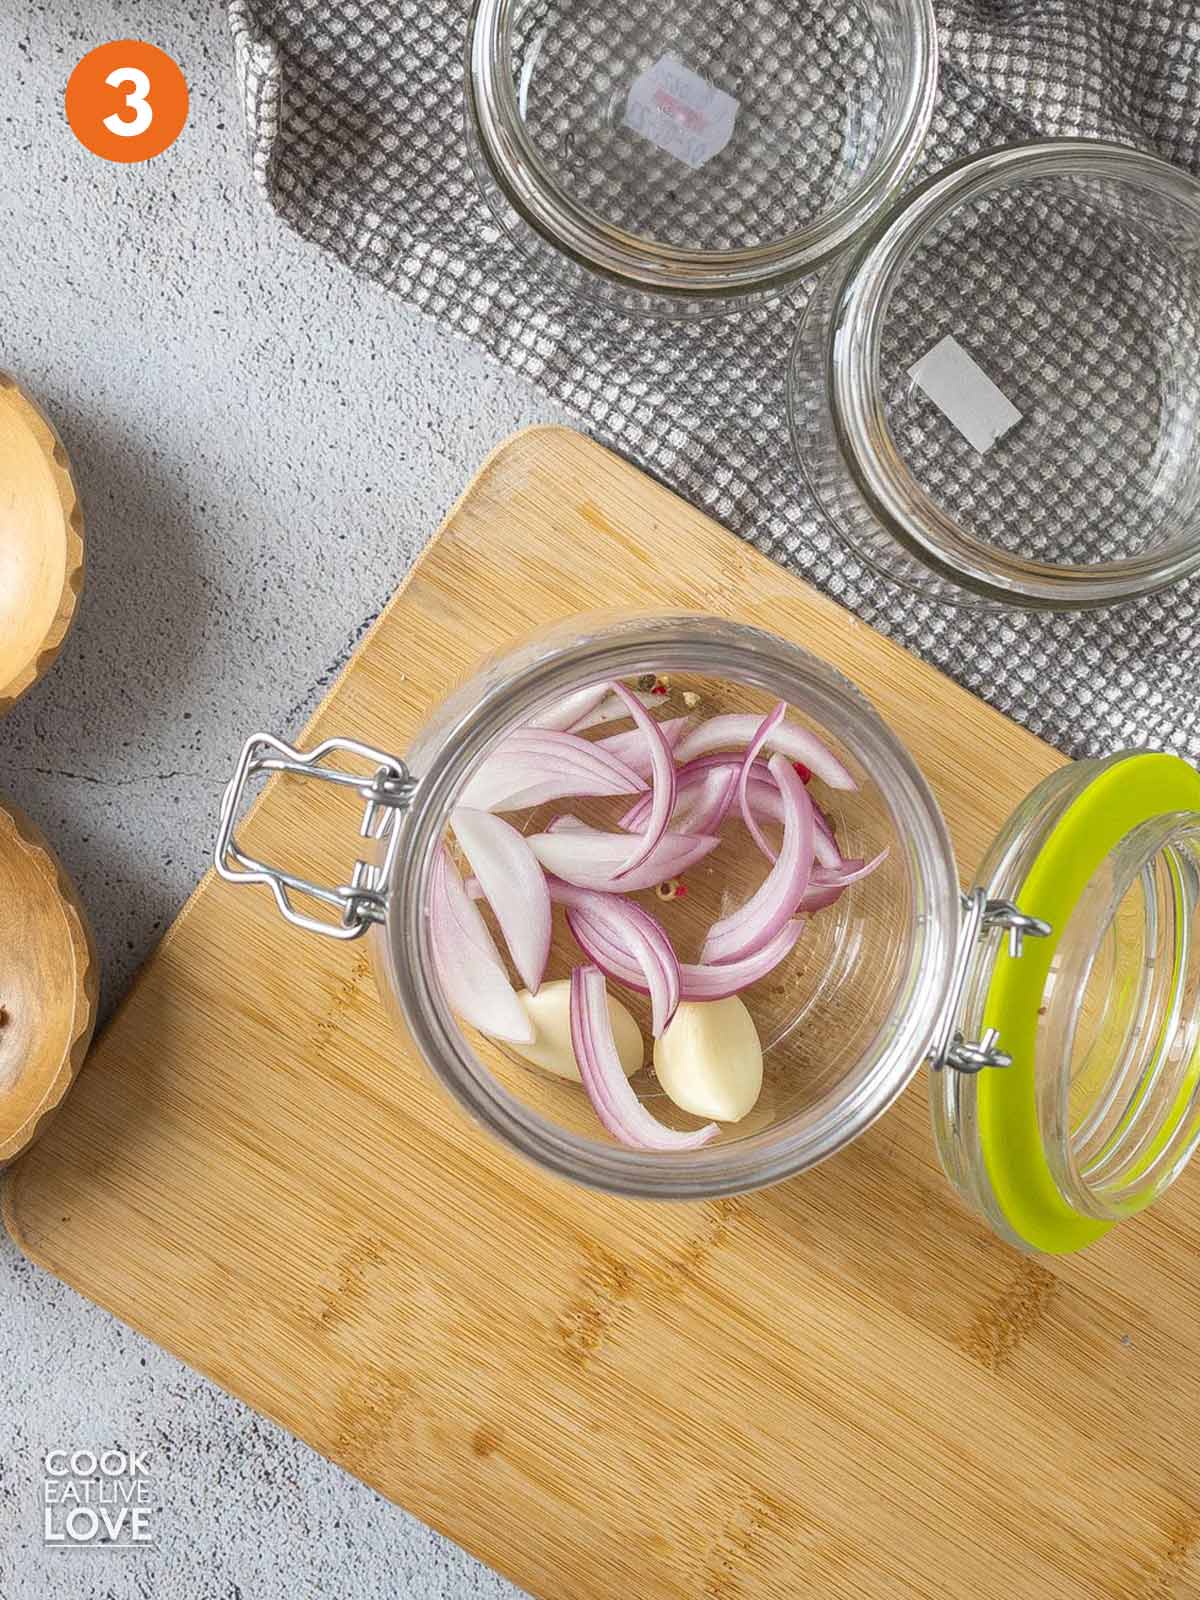 Onions and garlic in the jar.